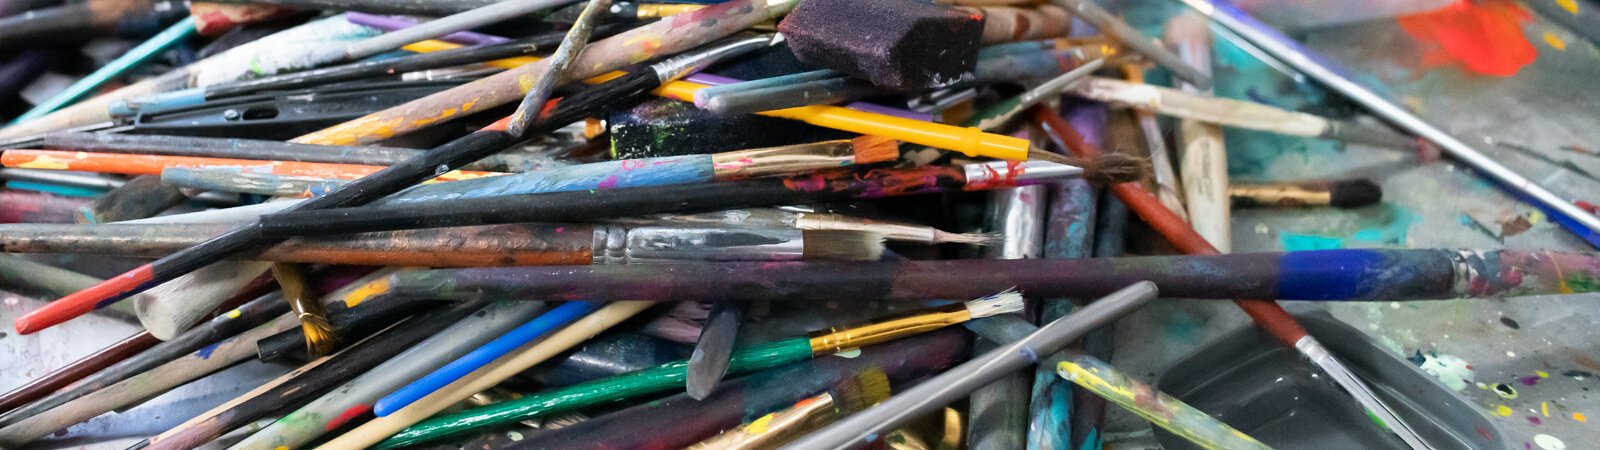 RedBird Art Studio in Warsaw encourages artists of all abilities to explore their talents.